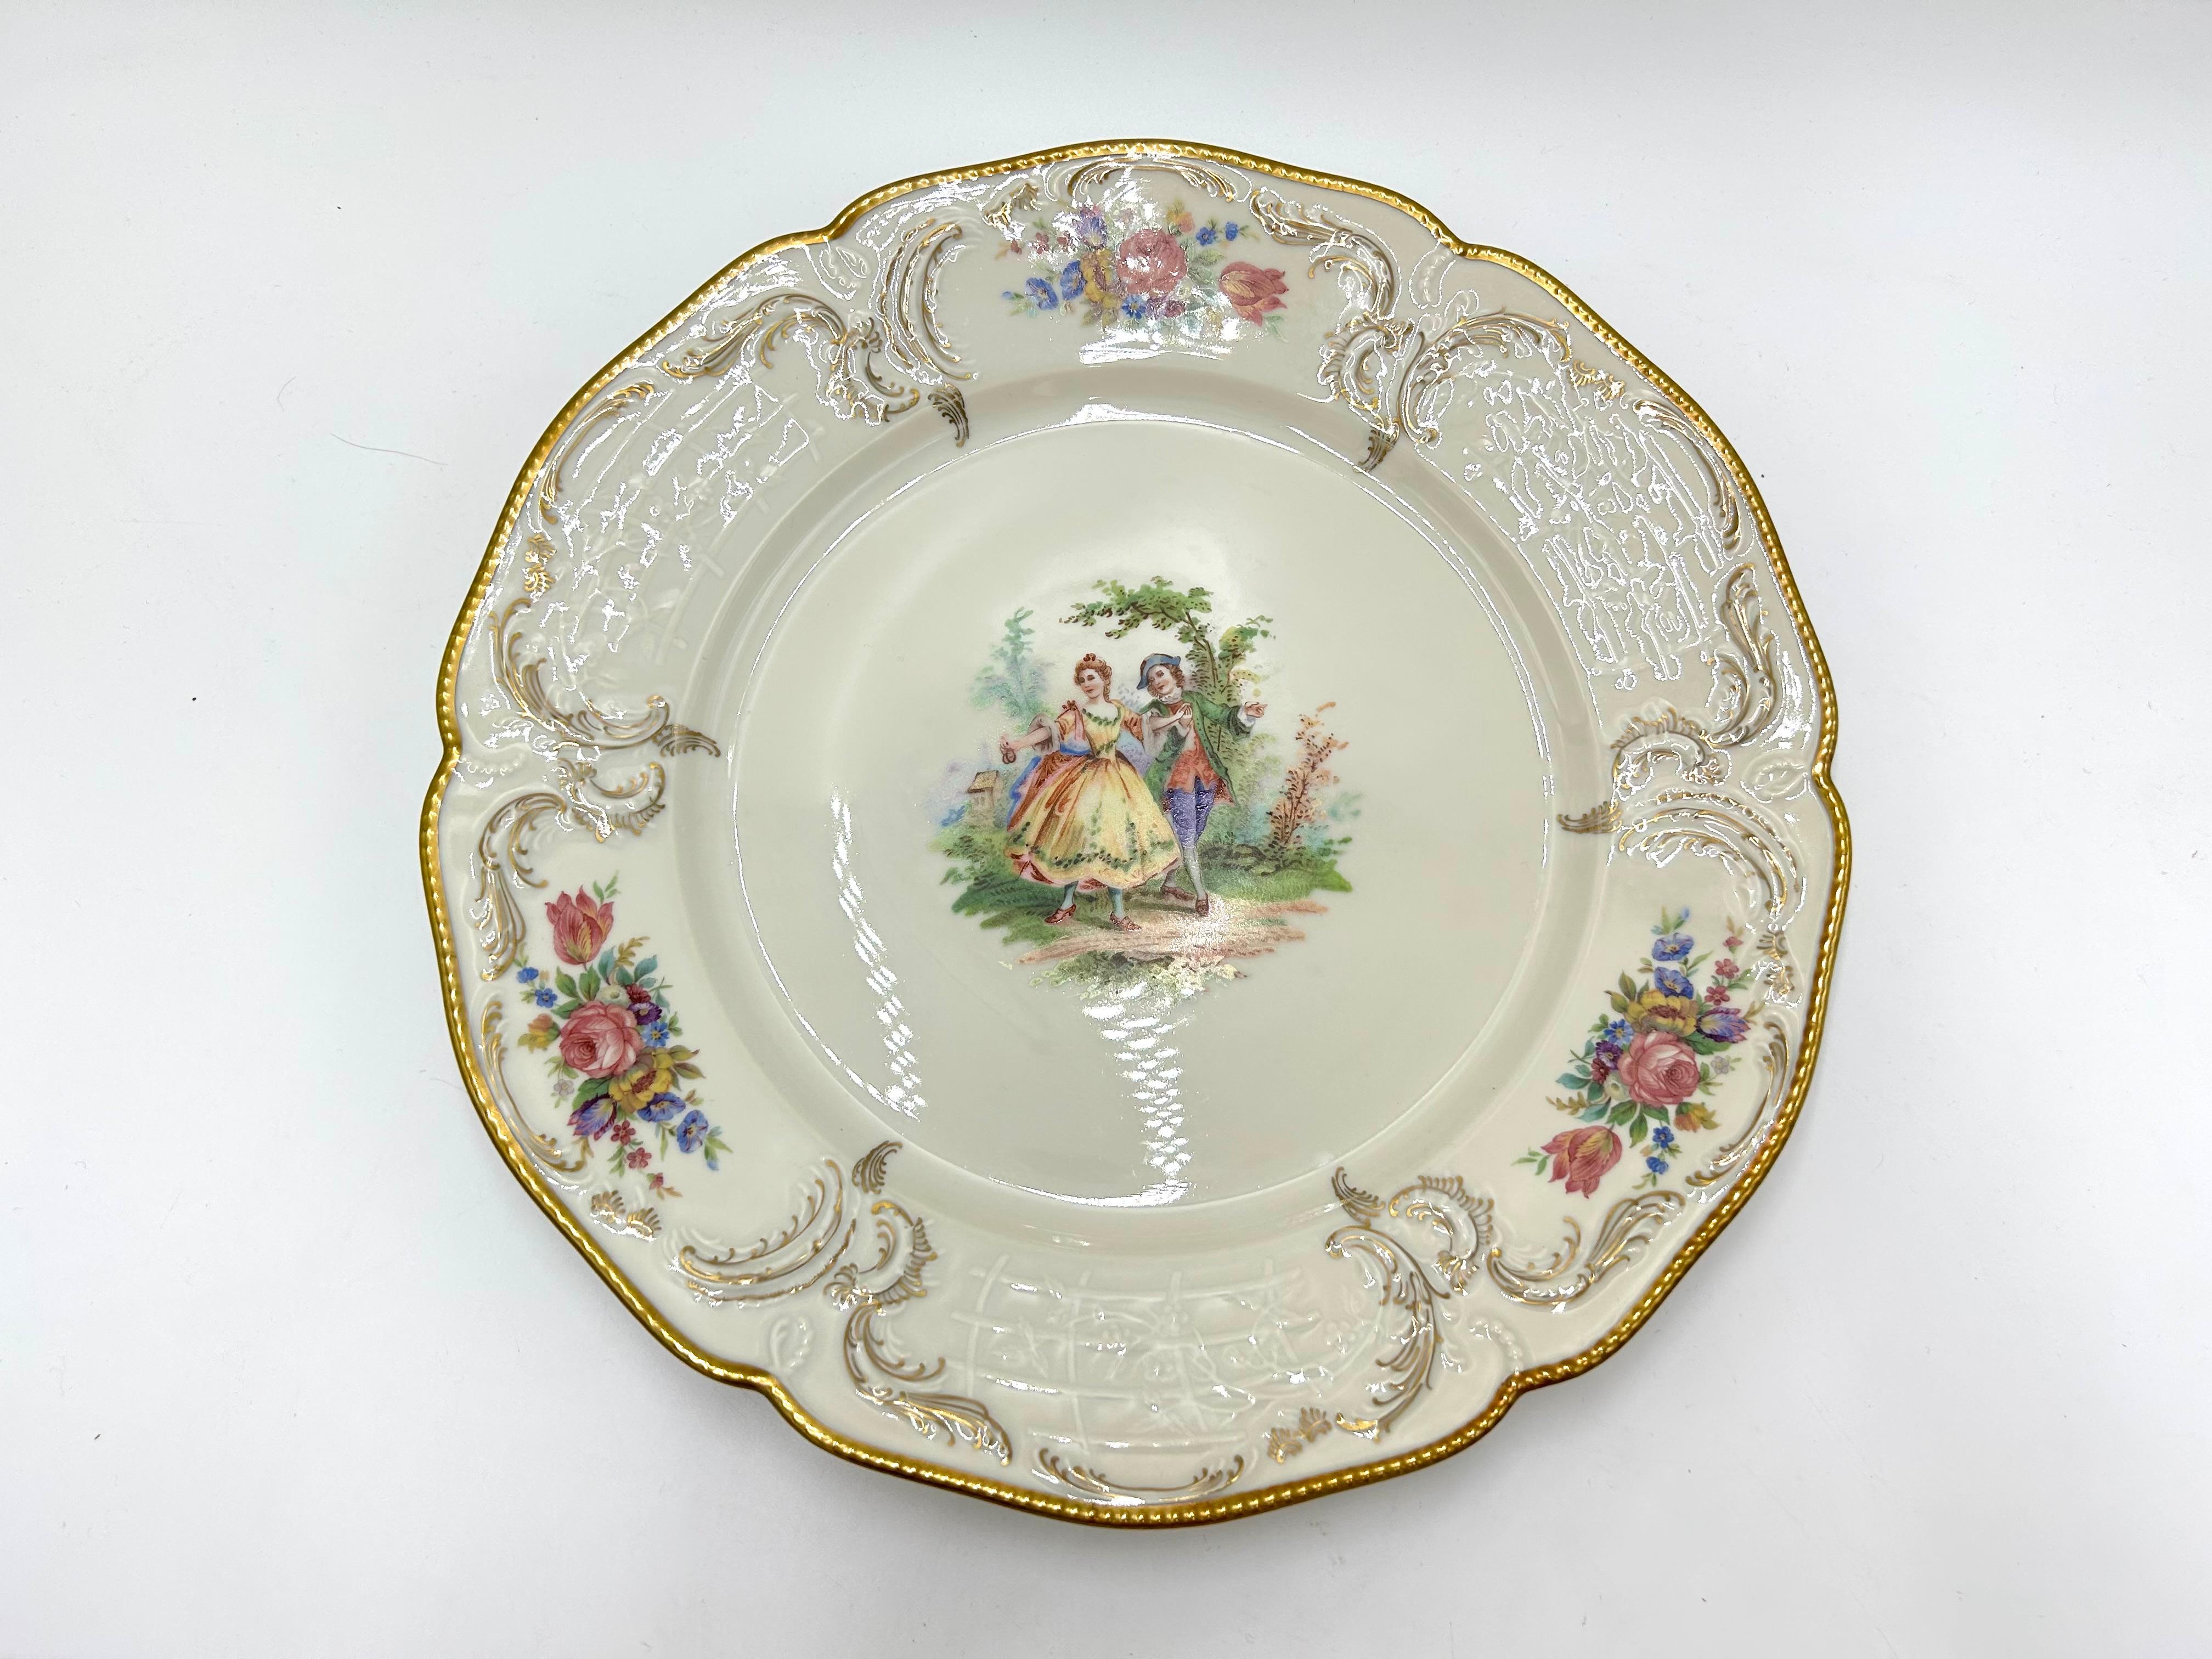 Porcelain plate, a product of the Sanssouci series of the valued German Rosenthal label.
Porcelain in ecru color, decorated with gilding, motif of floral bouquets and a genre scene.
Signed with the mark of the manufacturer from 1949.
diameter